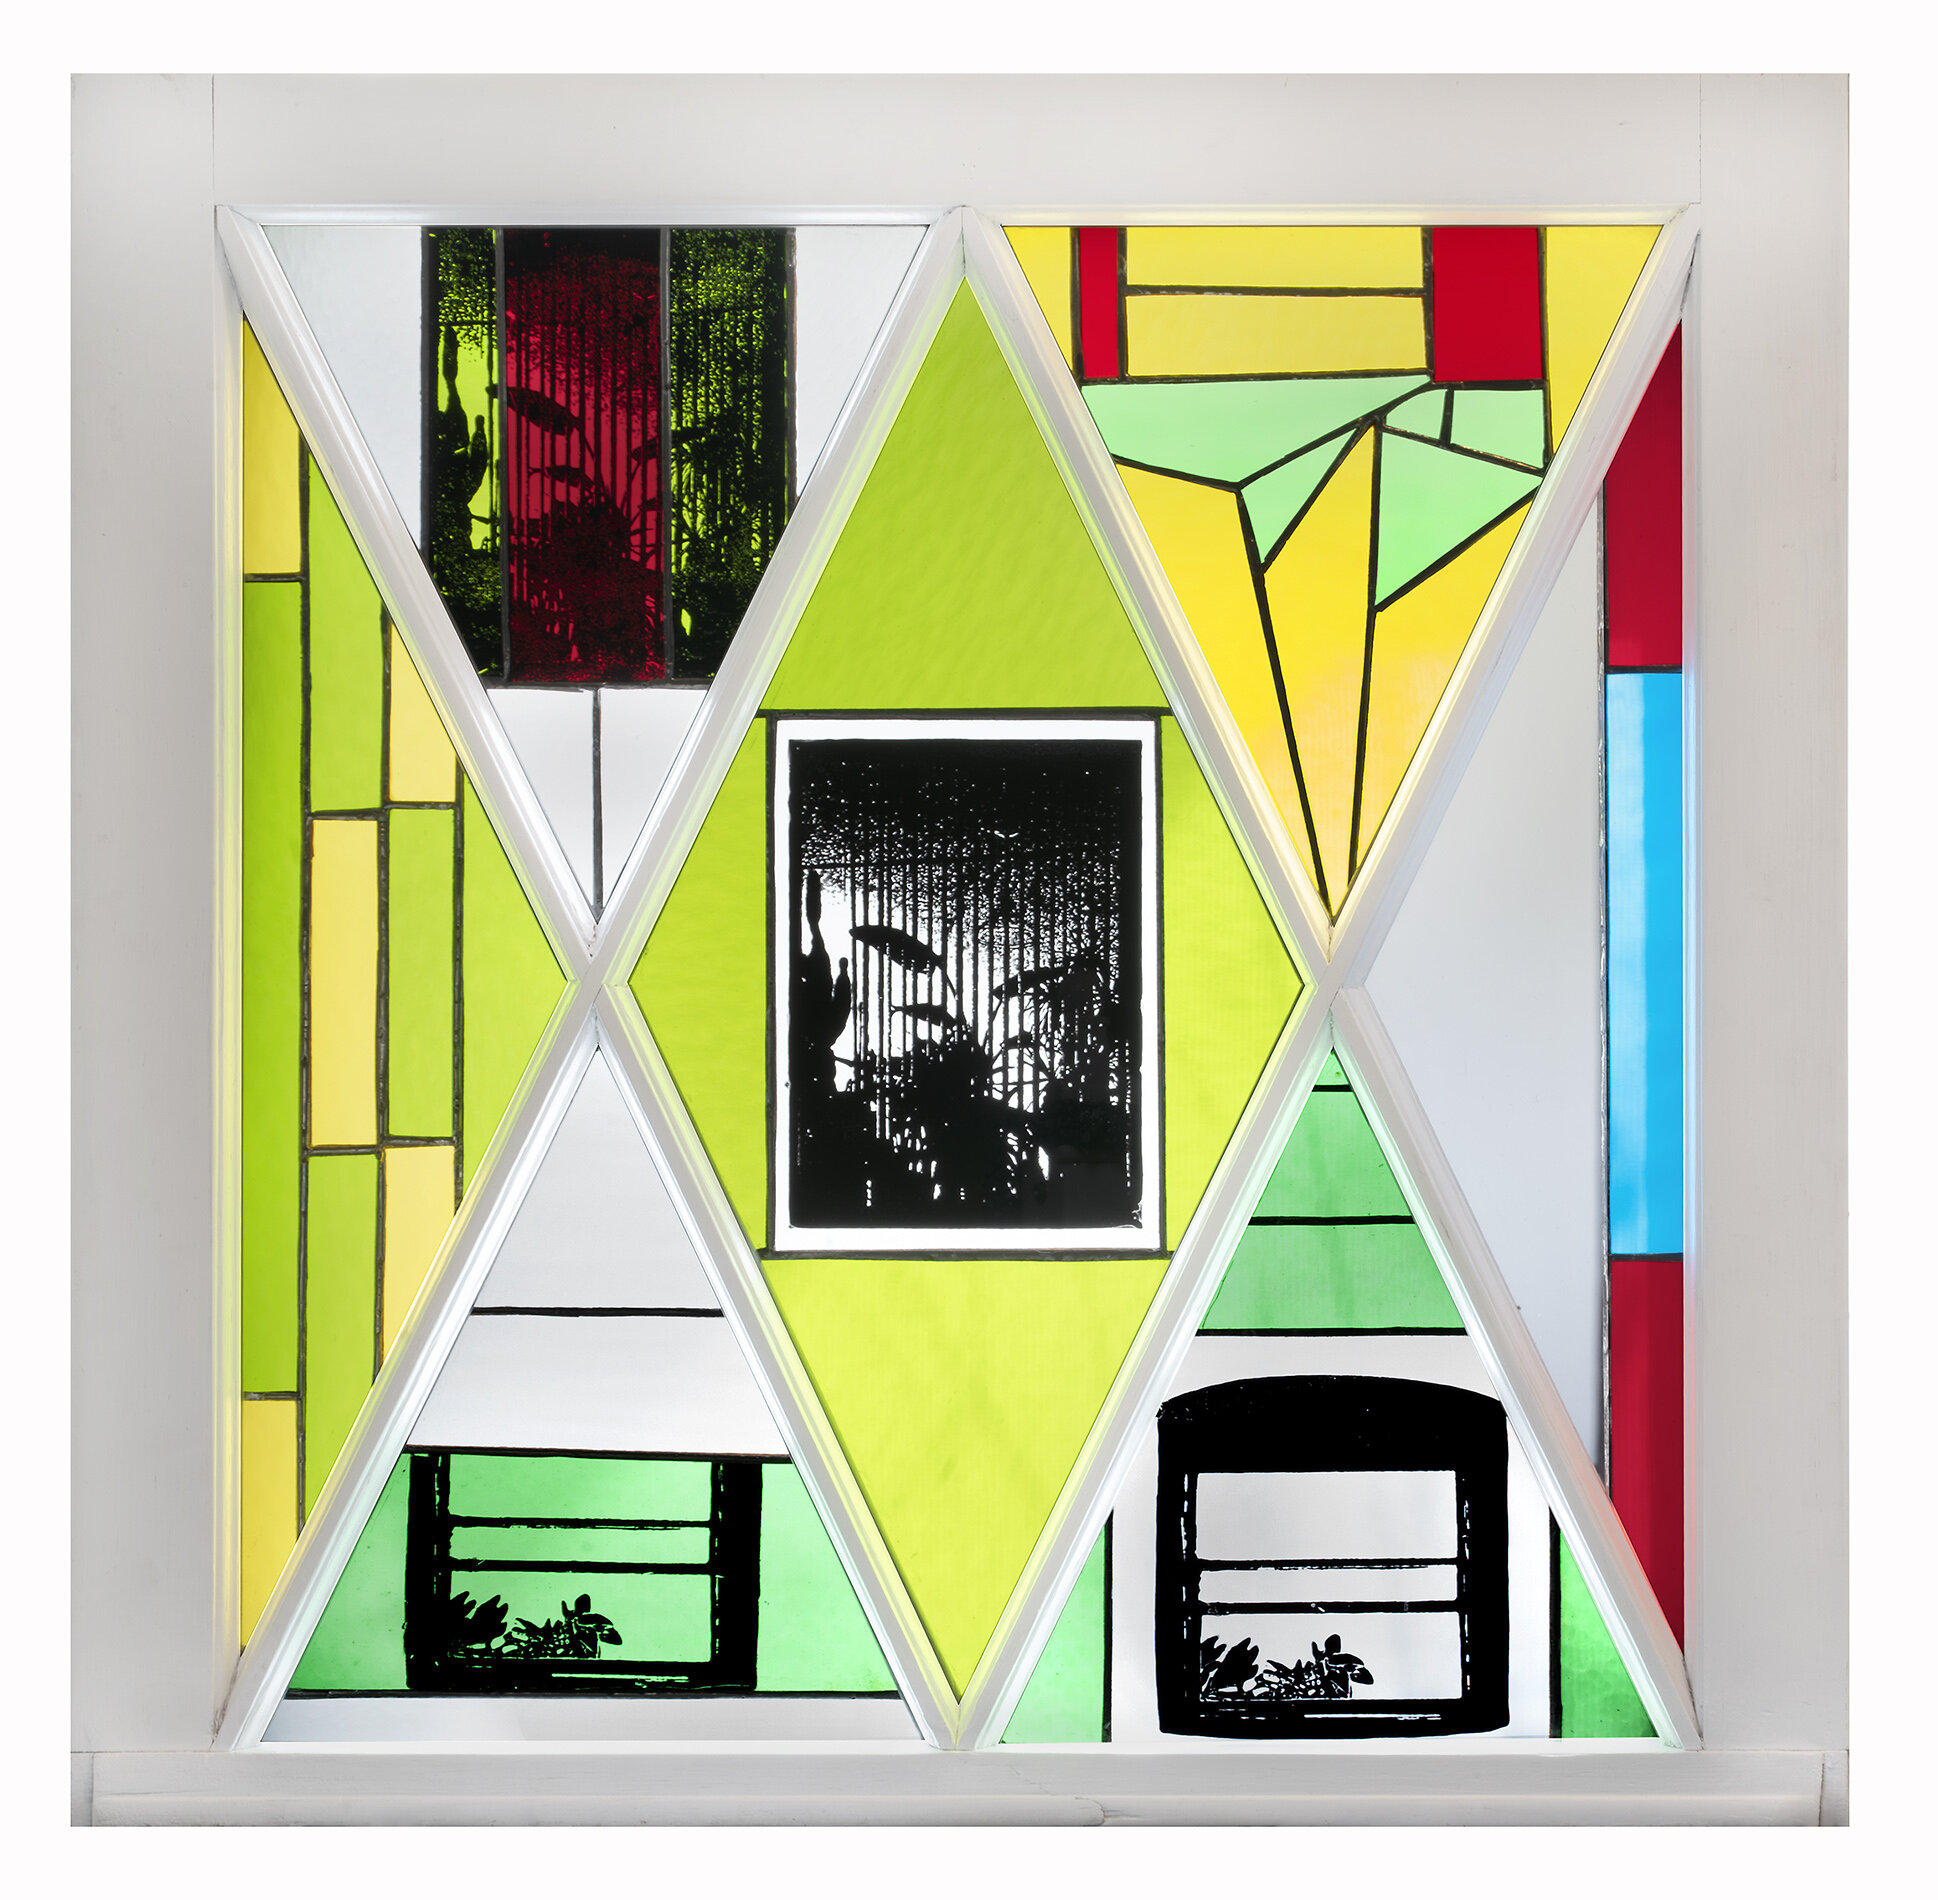  Maria Villanueva, OnLooker, 2021. Stained Glass and Screen Print on Glass, 24in x24in 